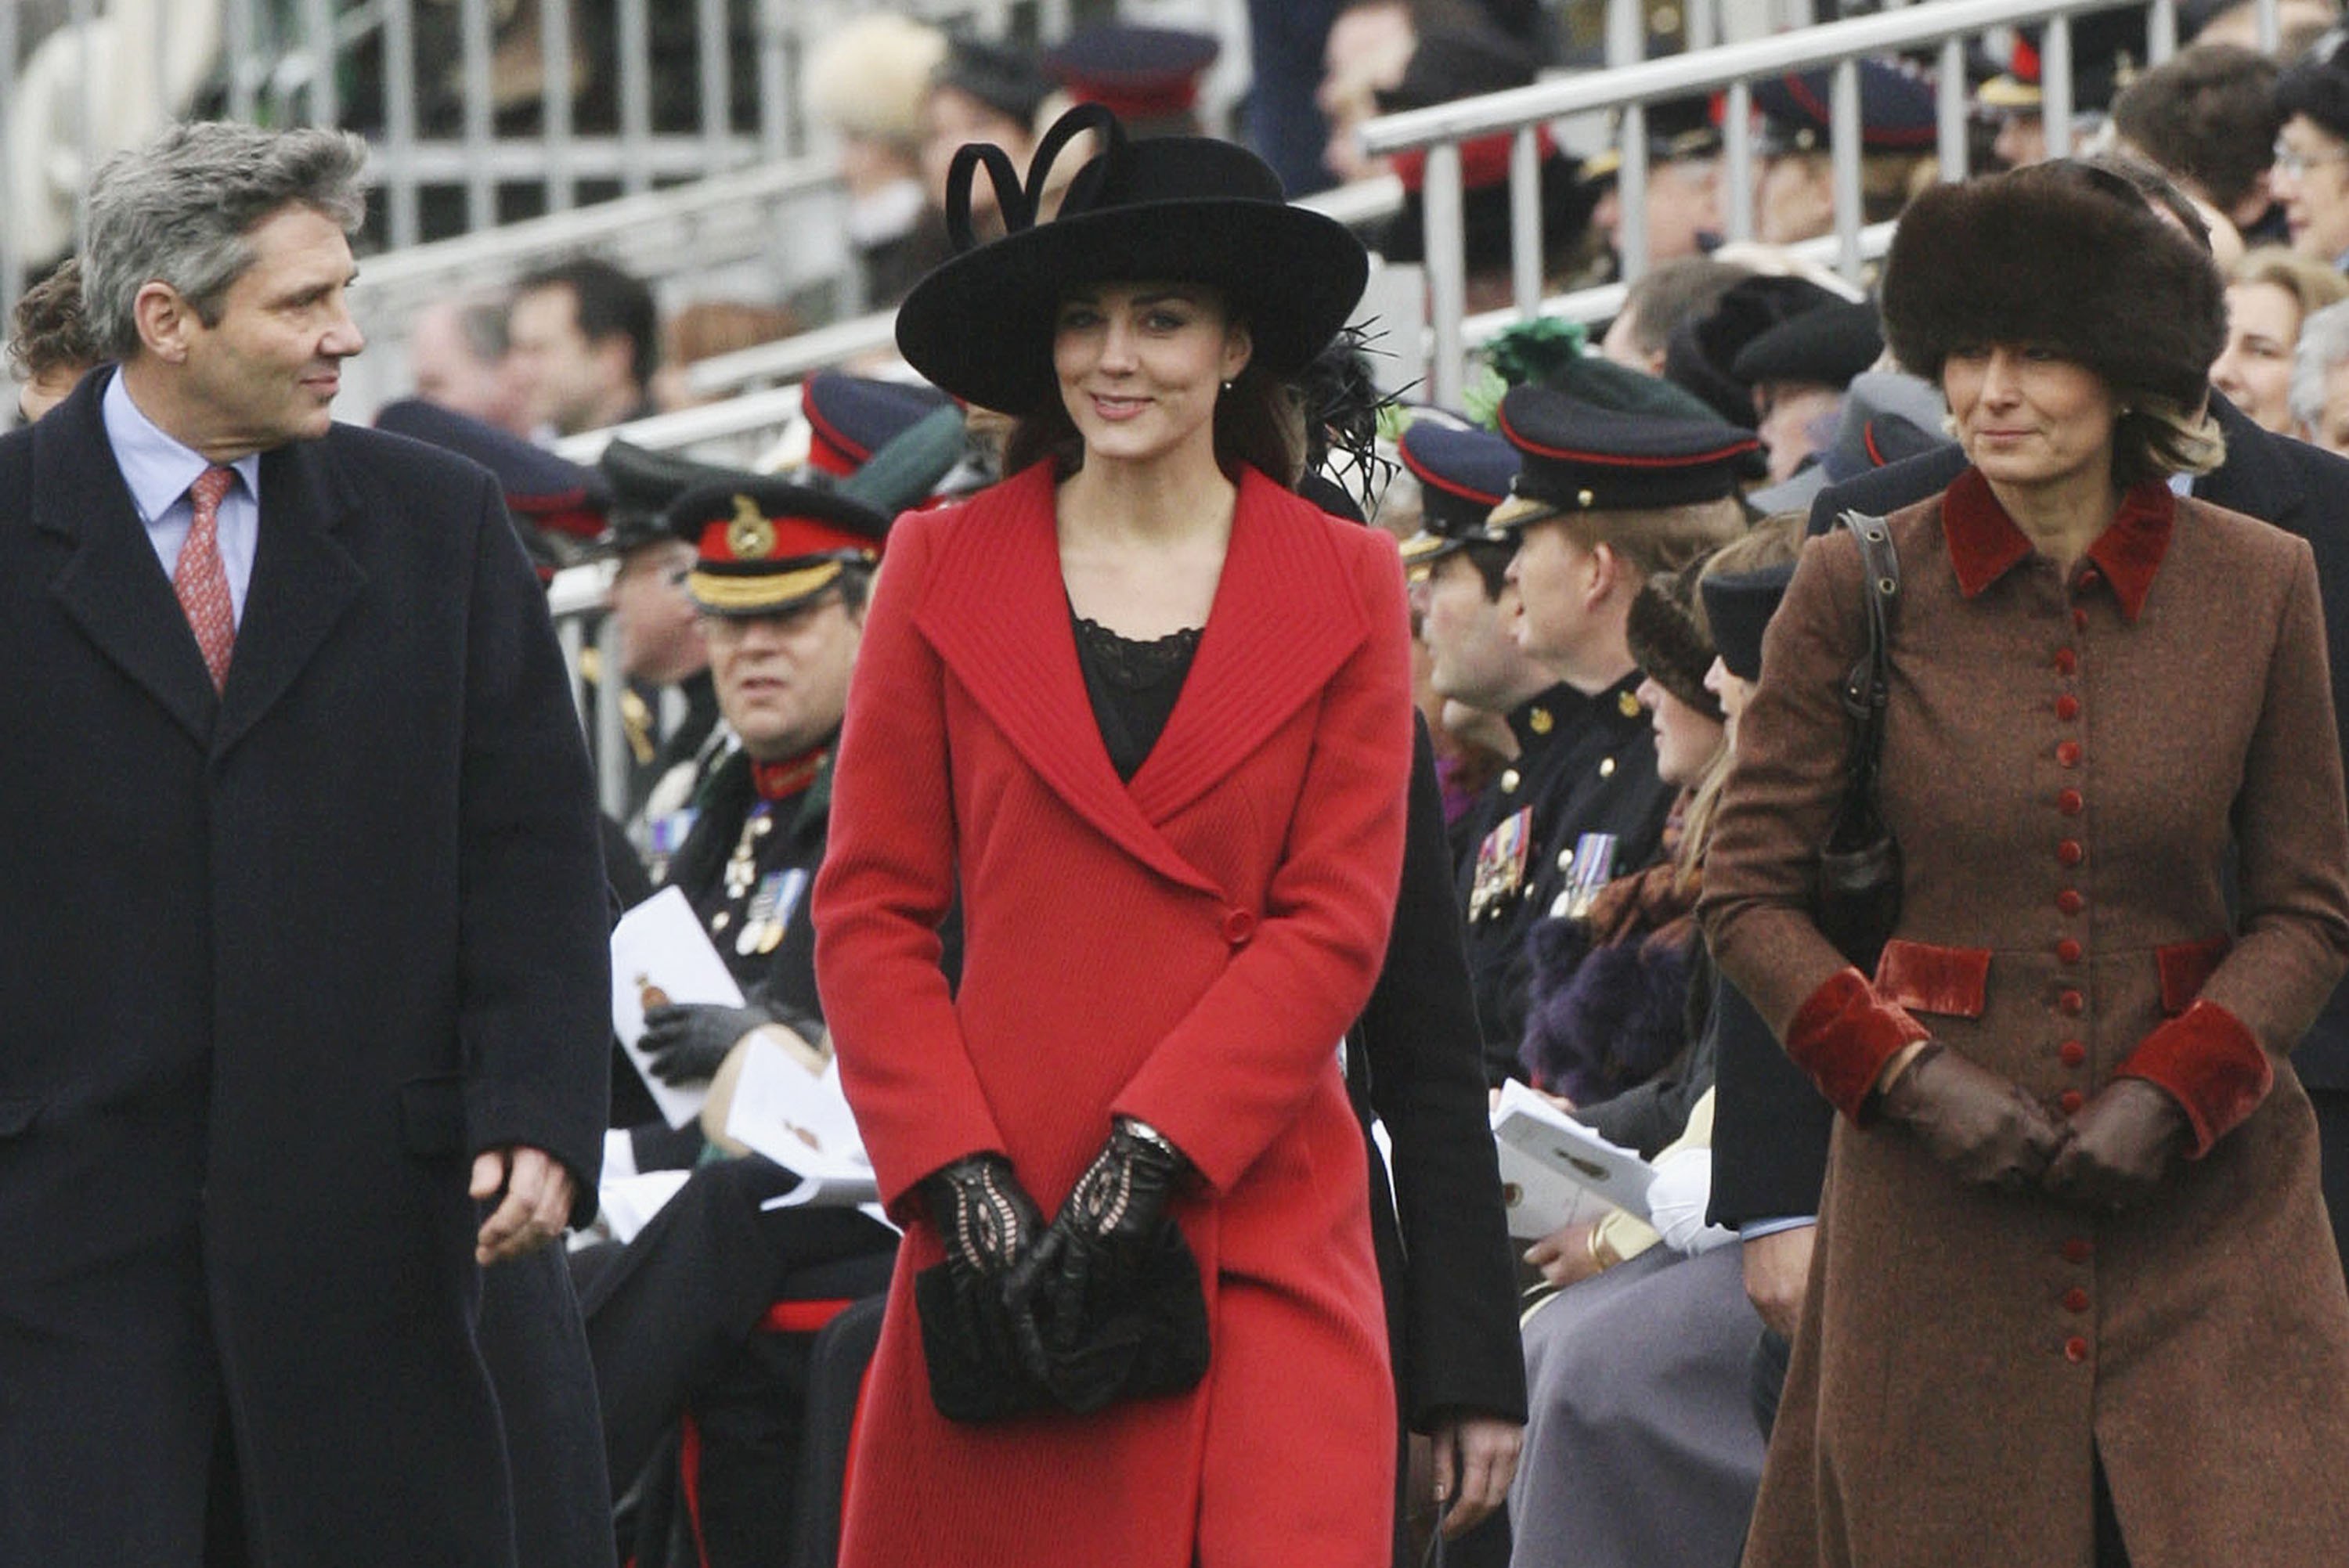 Kate Middleton, Prince William's girlfriend, with her parents Carole and Michael attend the Sovereign's Parade at Sandhurst Military Academy on December 15, 2006 in Surrey, England.  |  Source: Getty Images